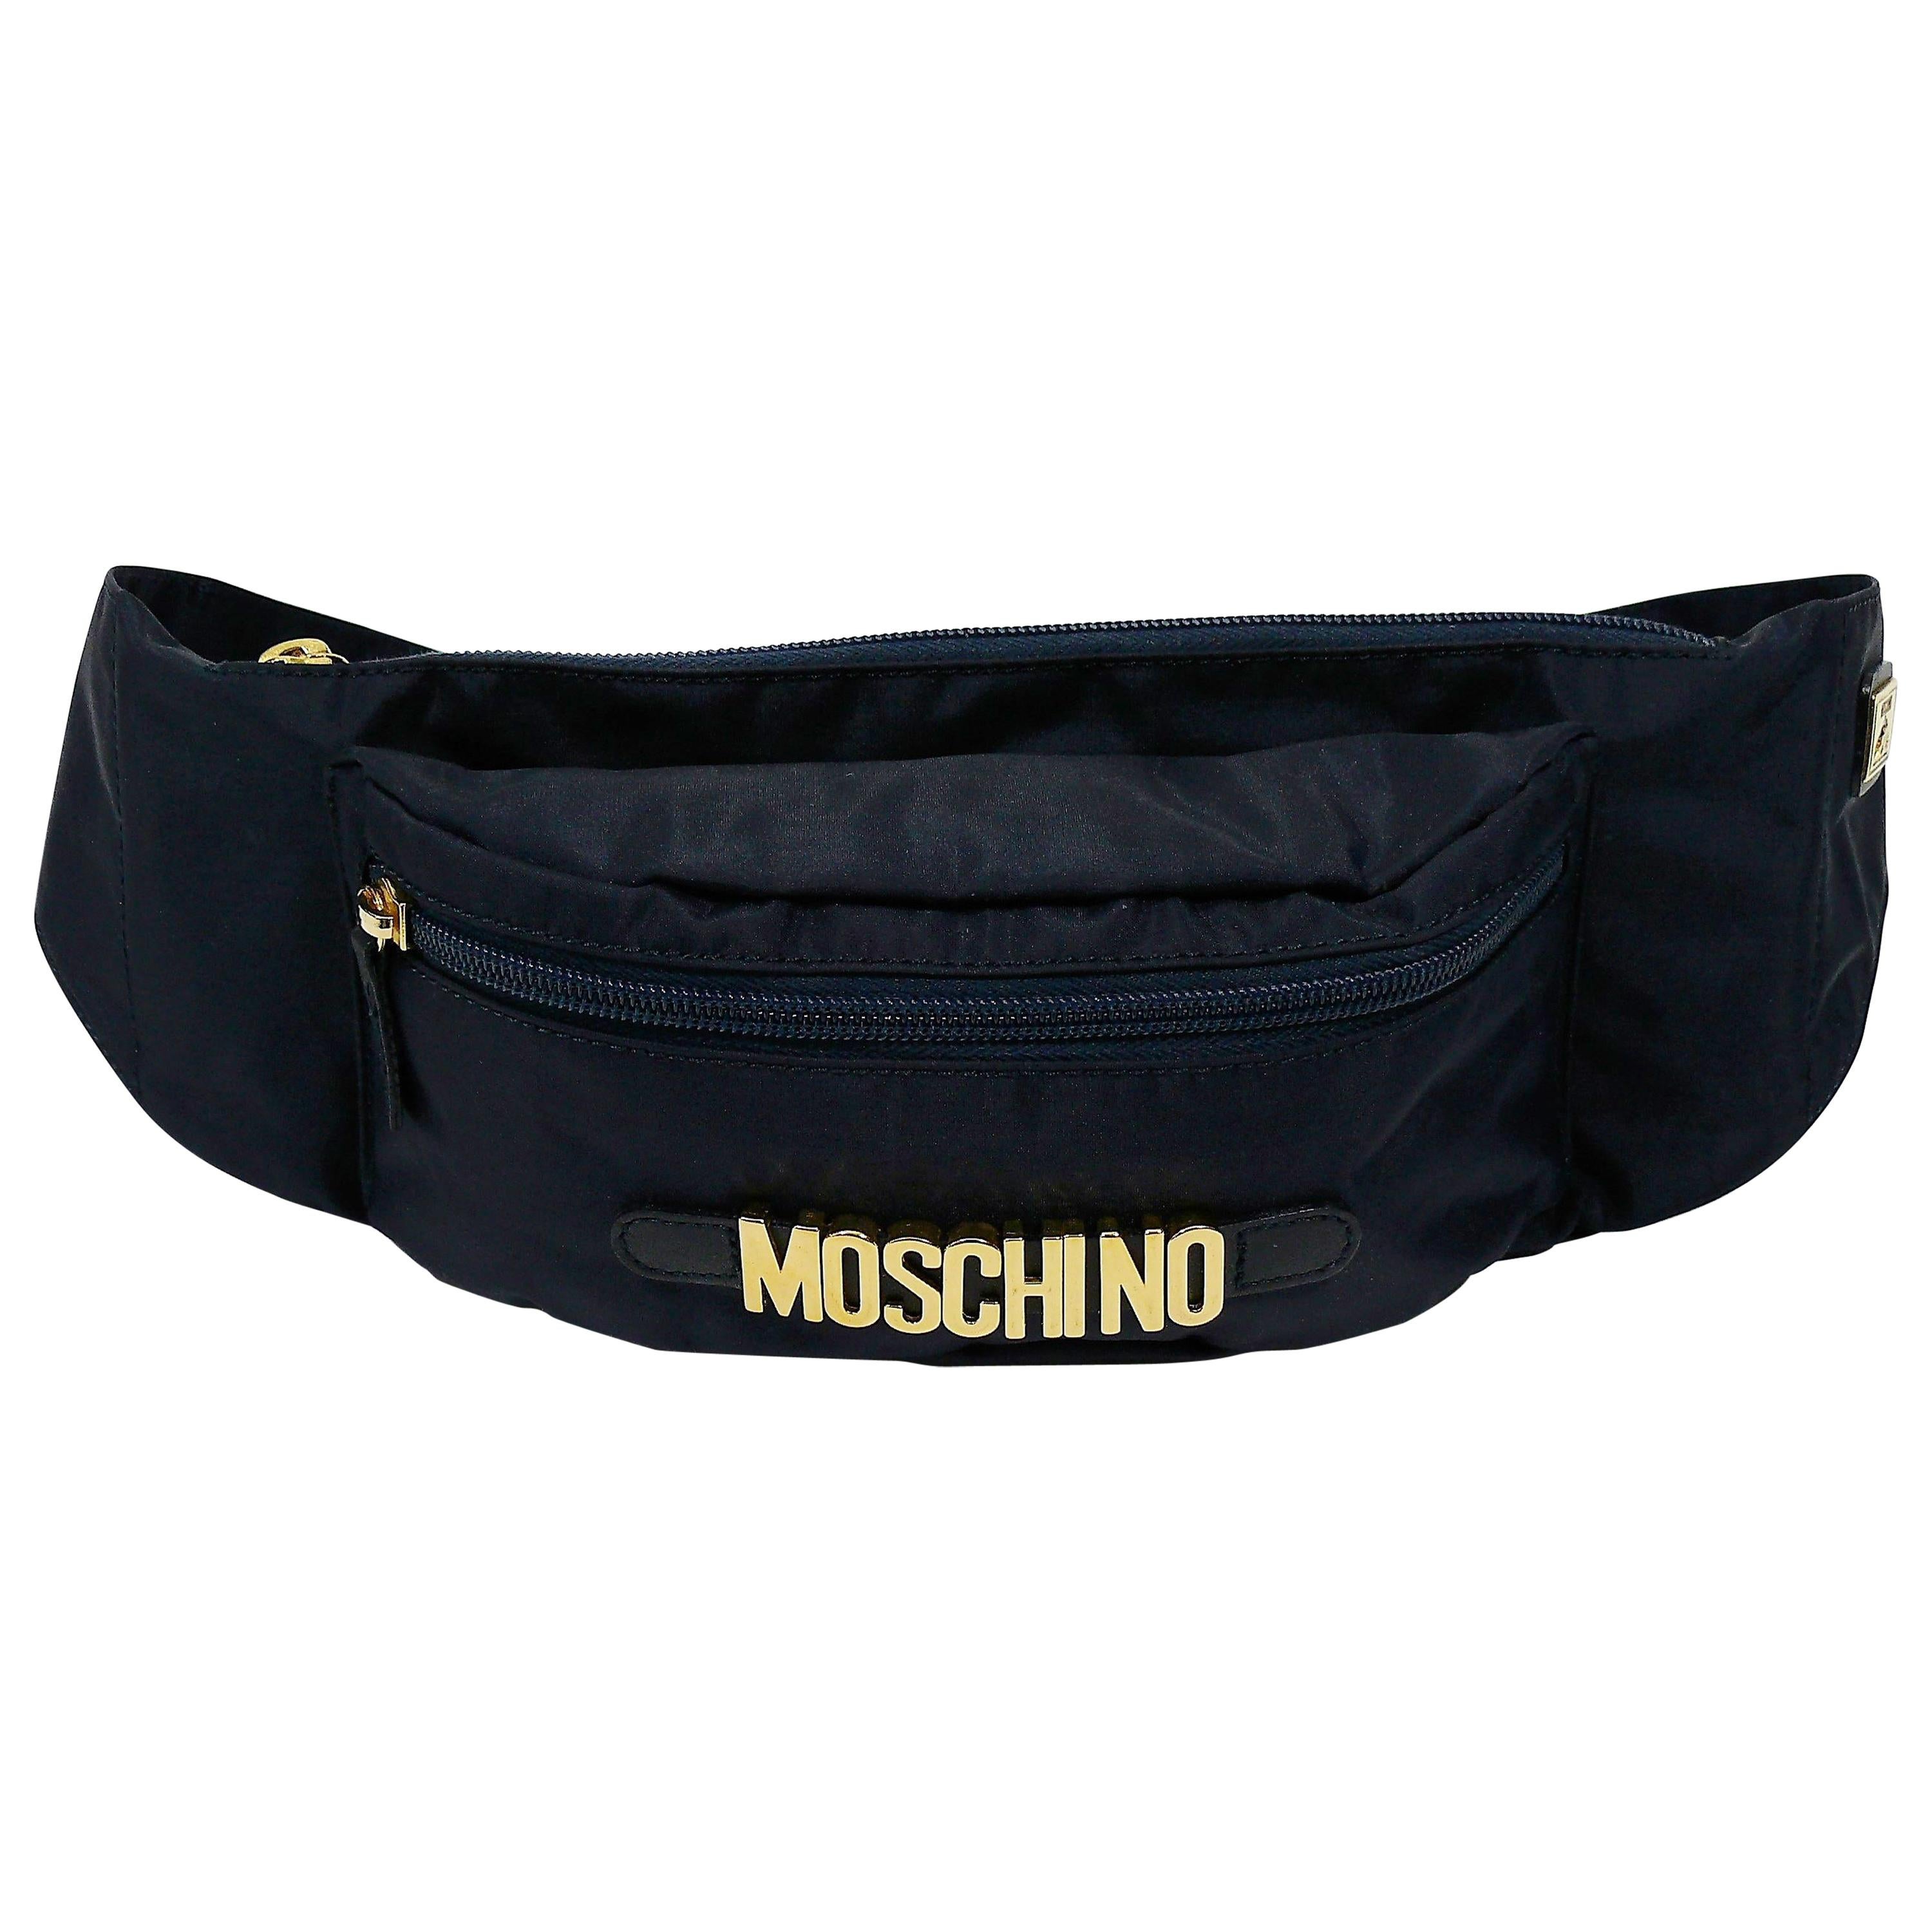 Vintage Moschino: Cheap & Chic Clothing, Bags & More - 1,045 For 